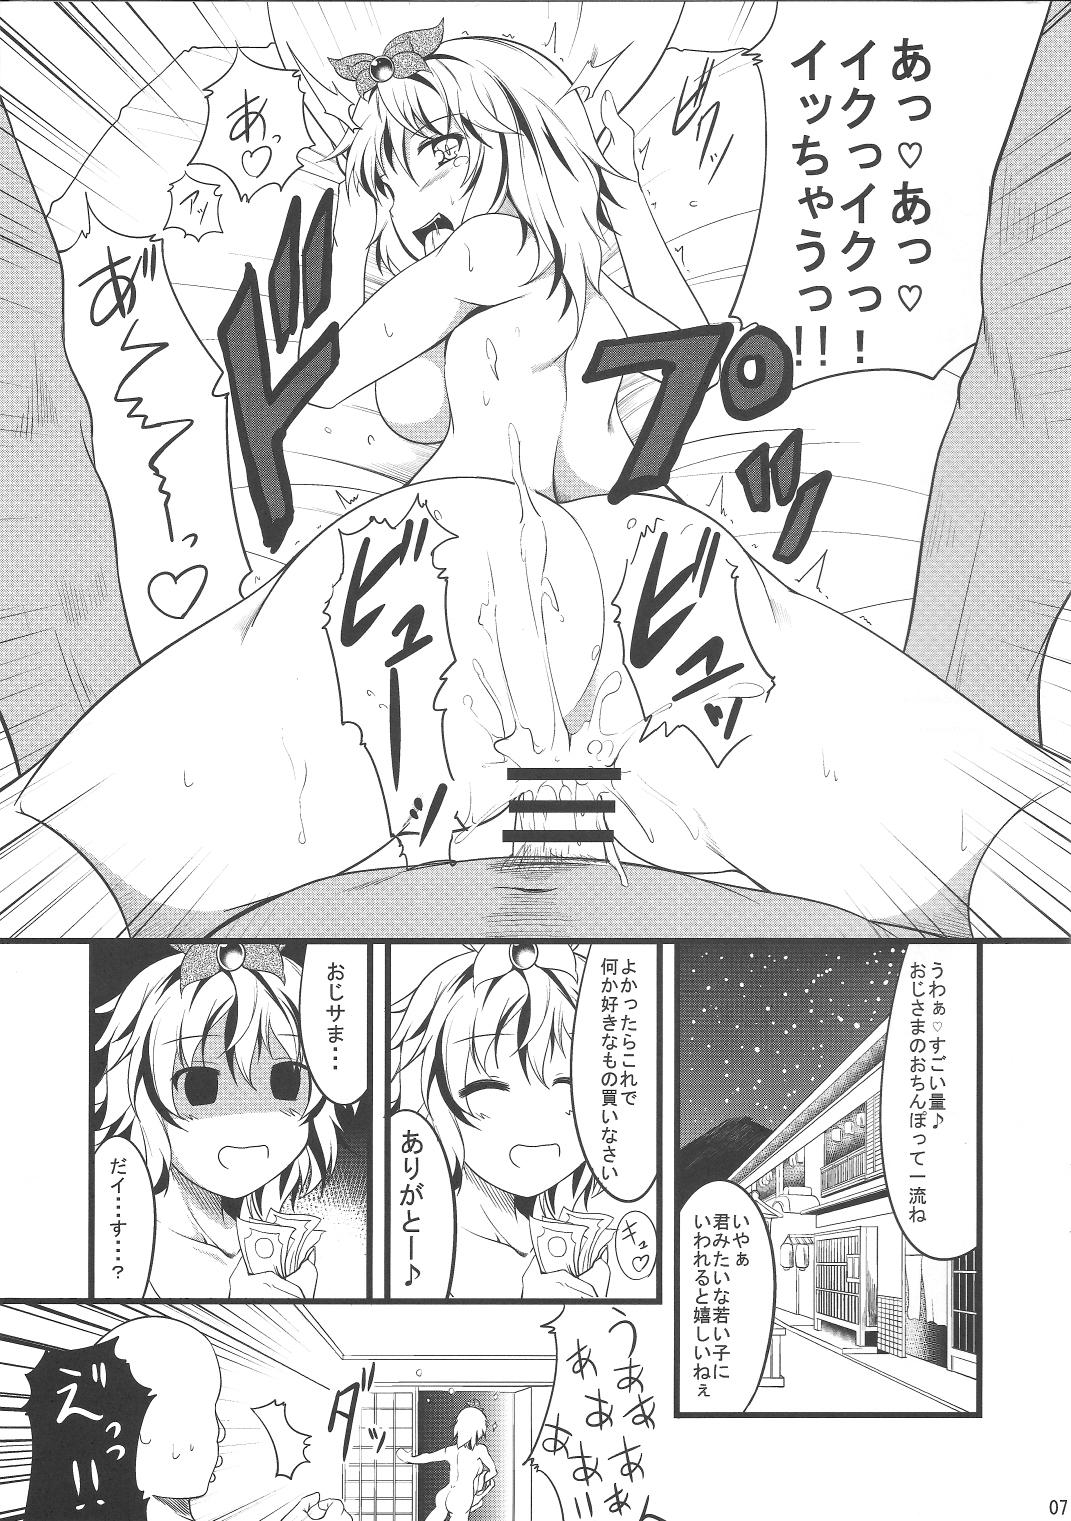 Bribe Jouyoku no Tora - Tiger of passion - Touhou project Animated - Page 6